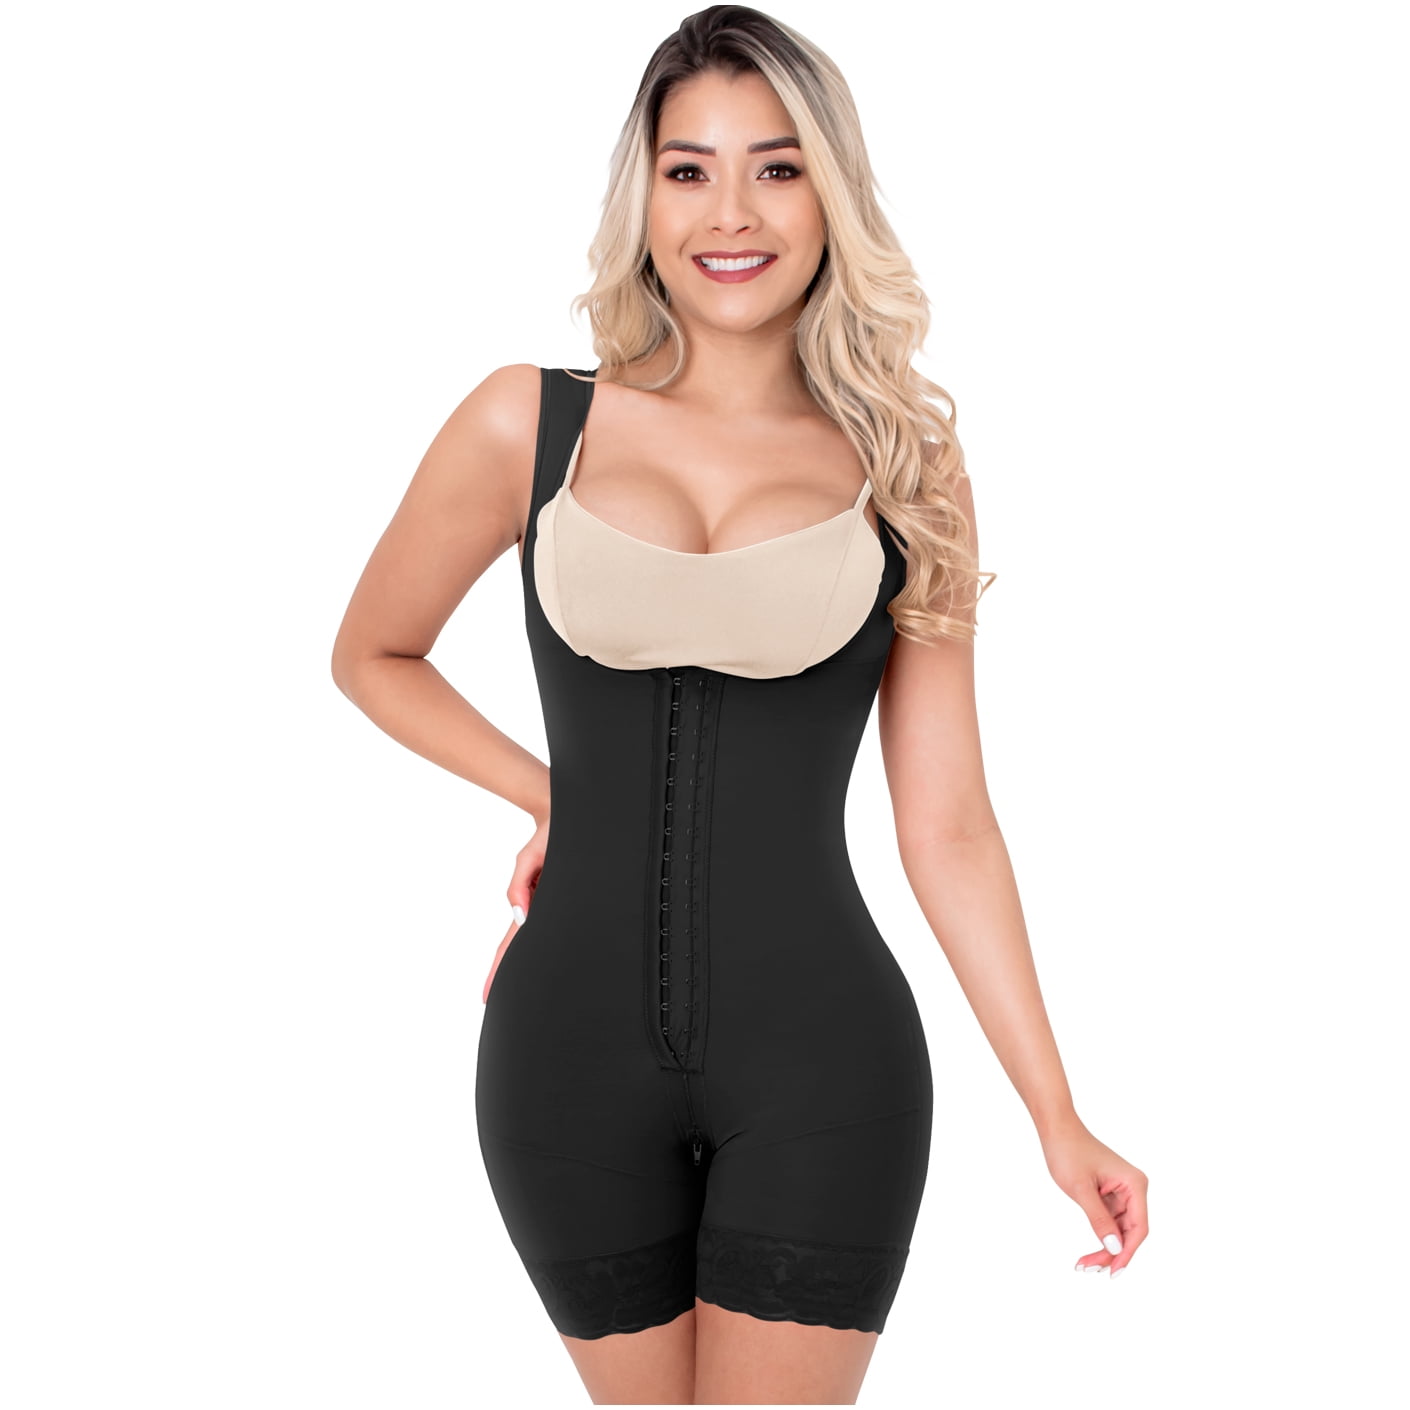 Details about   Fajas Colombianas Reductoras Levanta Cola Post Parto Surgery Full Body Shaper US